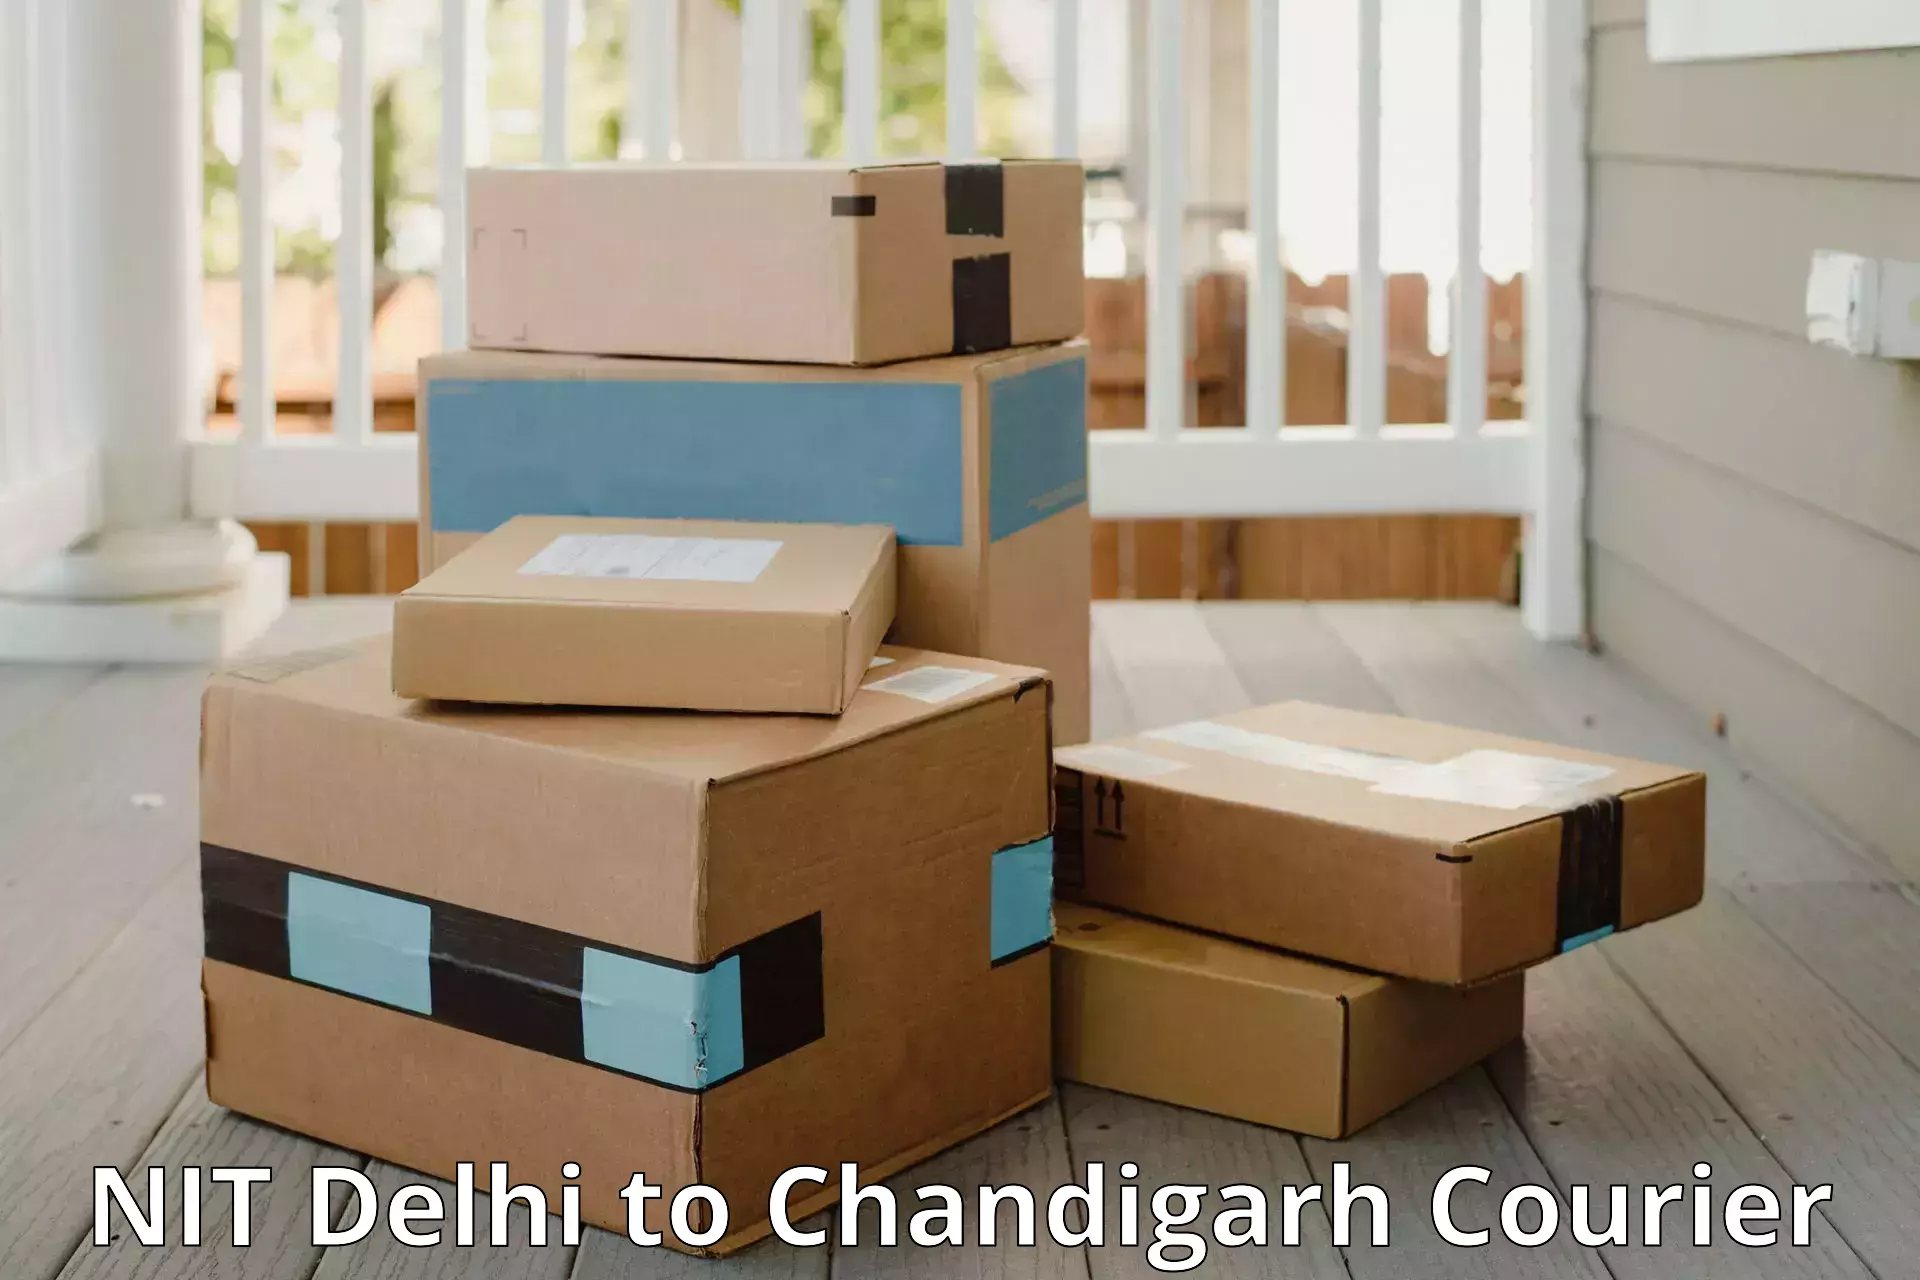 Hassle-free luggage shipping in NIT Delhi to Chandigarh